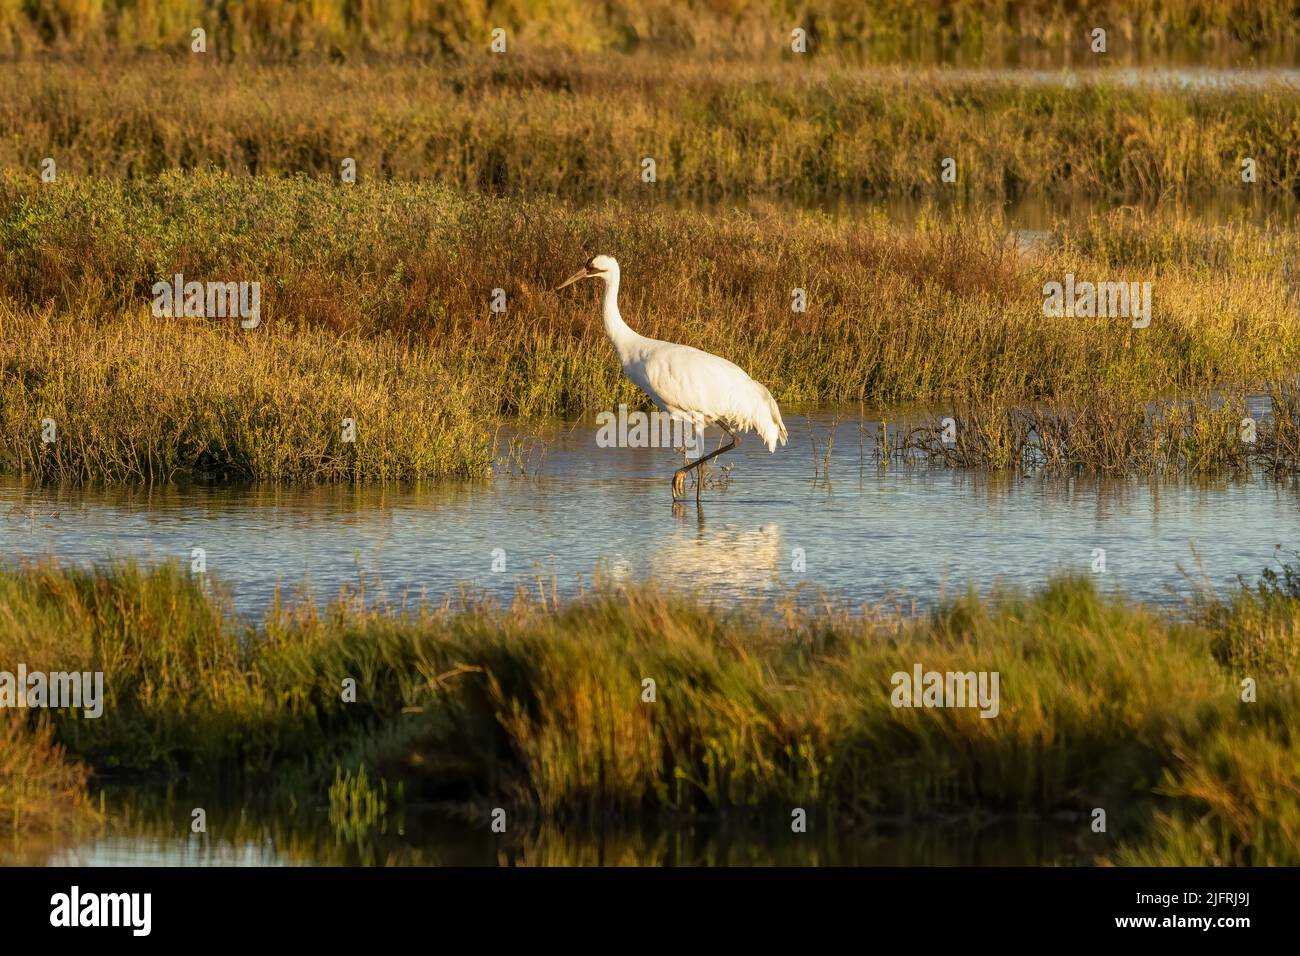 An adult Whooping Crane, Grus americana, wading in a saltwater marsh in the Aransas National Wildlife Refuge in Texas. Stock Photo